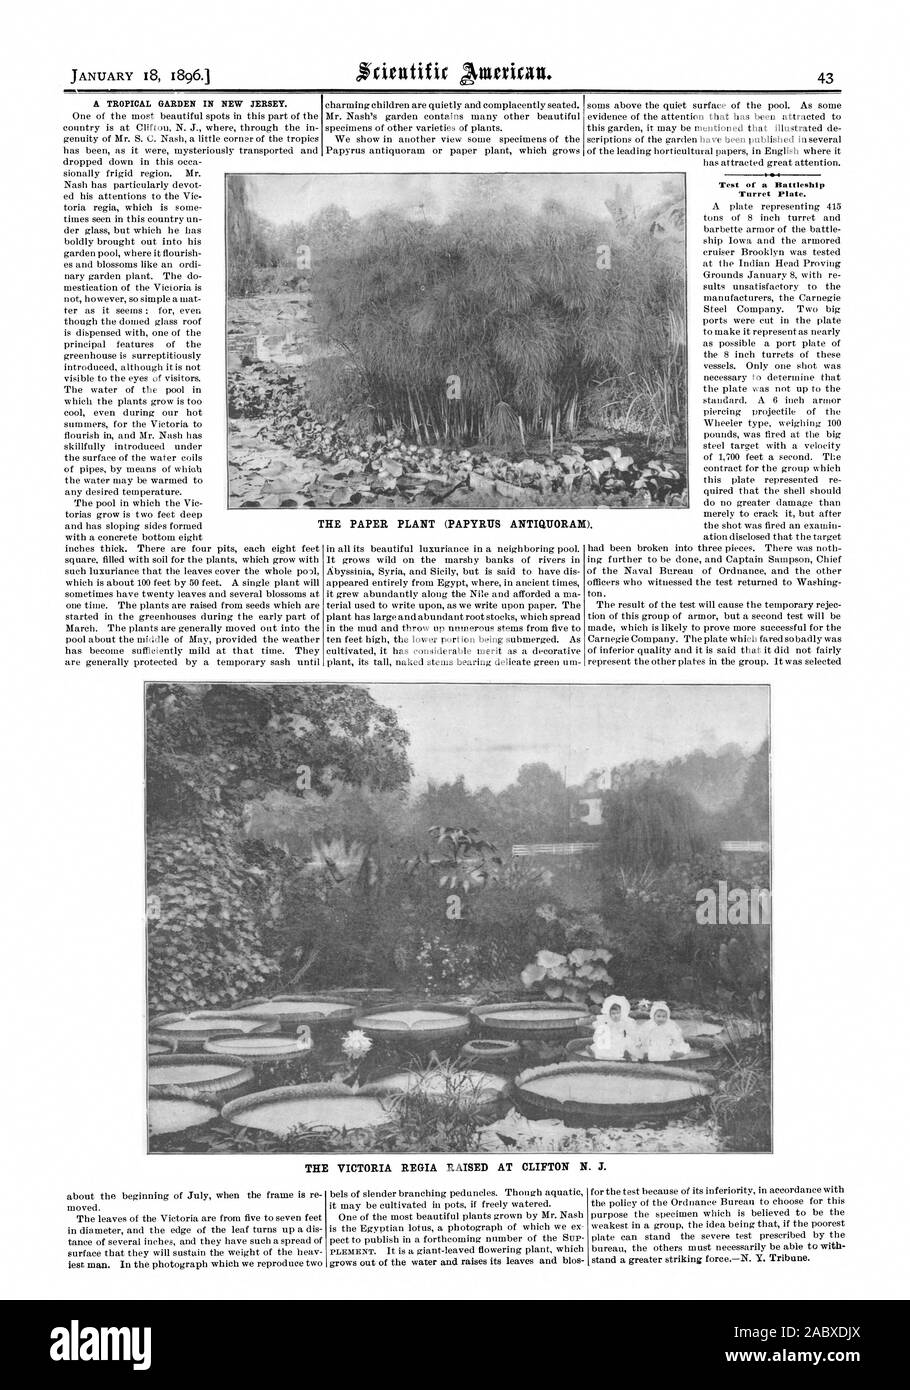 A TROPICAL GARDEN IN NEW JERSEY. Test of a Battleship Turret Plate. THE ANTIQUORA31). PAPER PLANT (PAPYRUS THE VICTORIA REGIA RAISED AT CLIFTON N. J., scientific american, 1896-01-18 Stock Photo